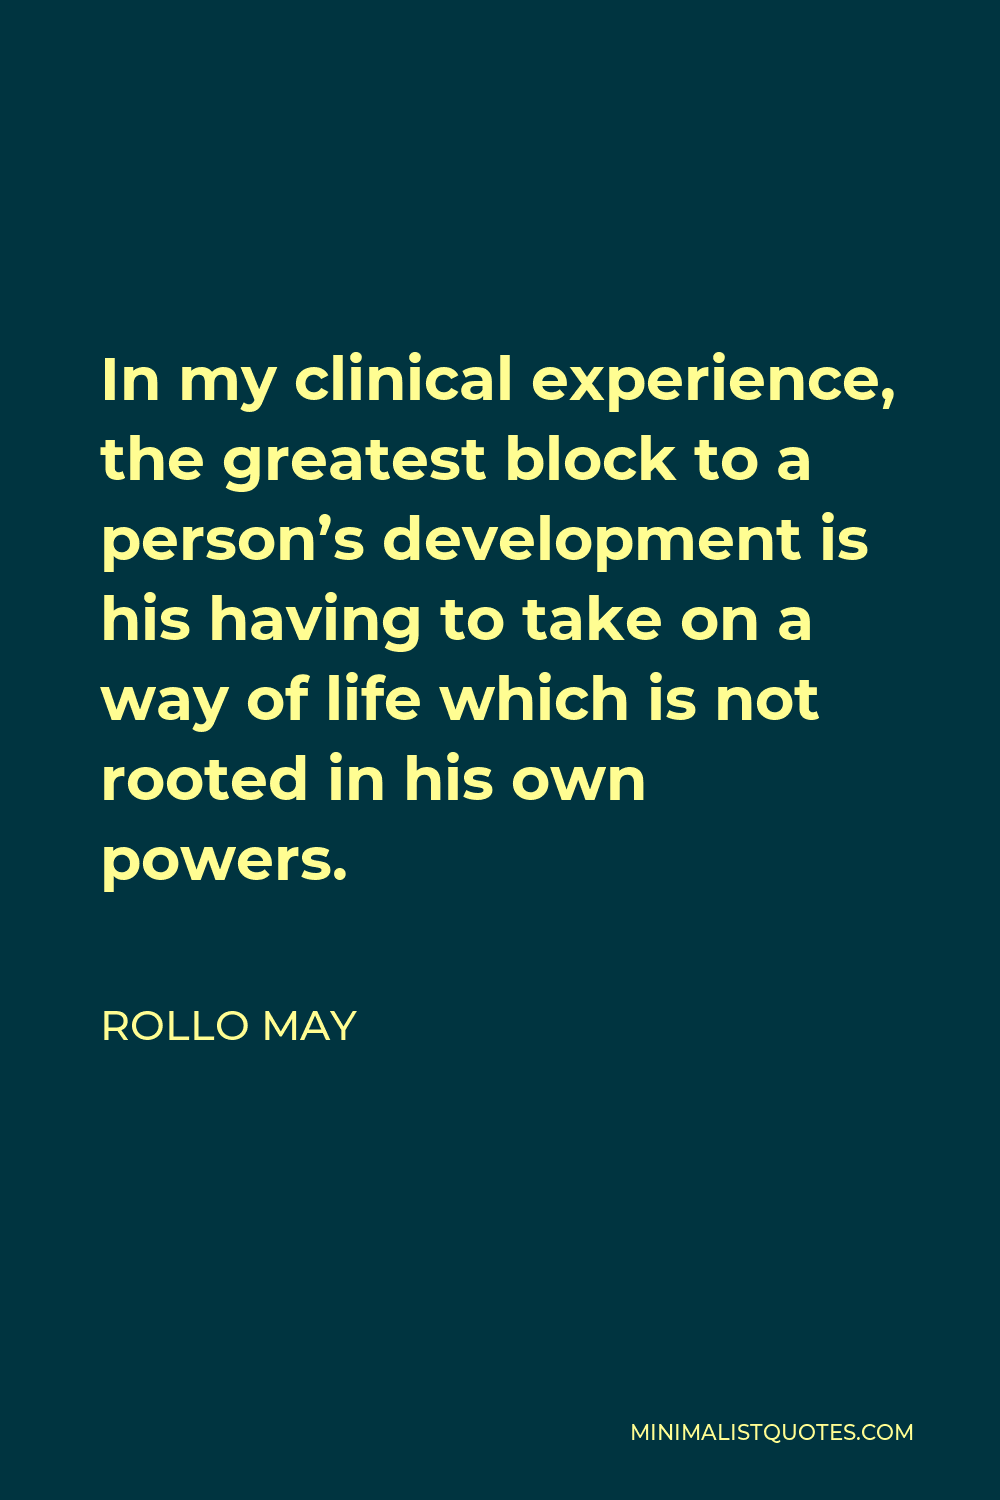 Rollo May Quote - In my clinical experience, the greatest block to a person’s development is his having to take on a way of life which is not rooted in his own powers.